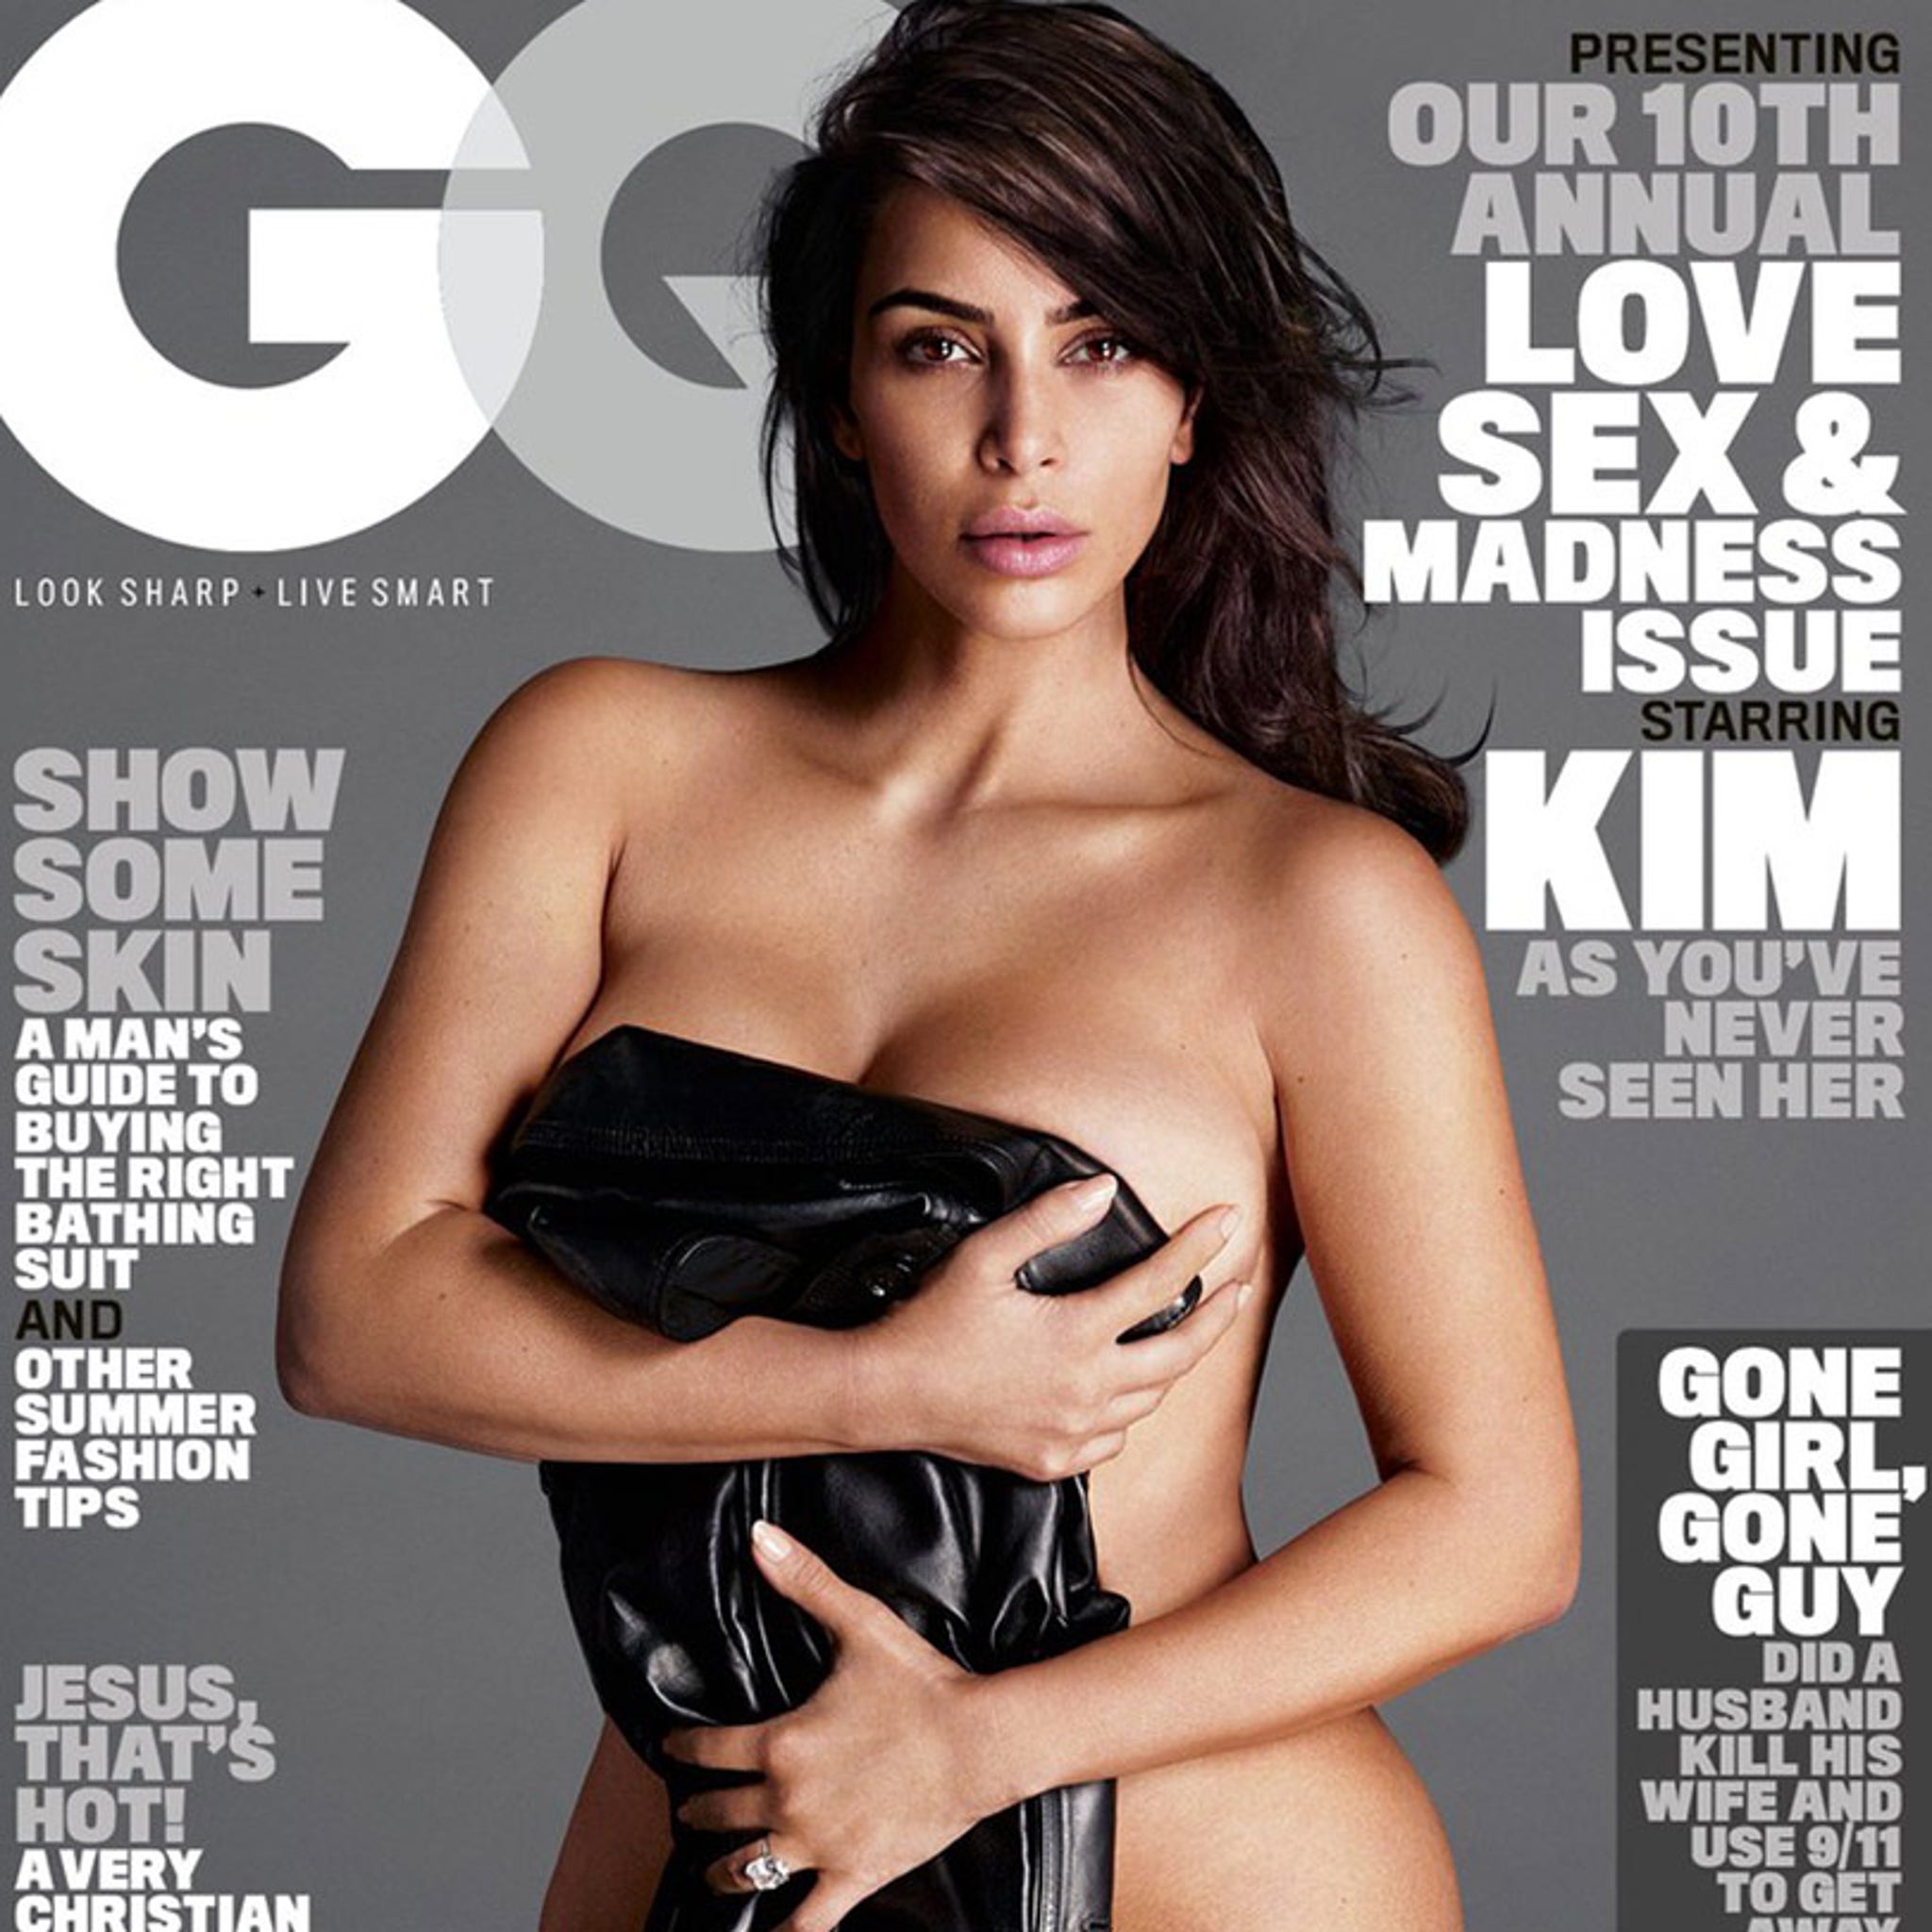 Kim Kardashian Covers GQ Completely Naked After Dropping 60lbs Of Baby Weight! image picture